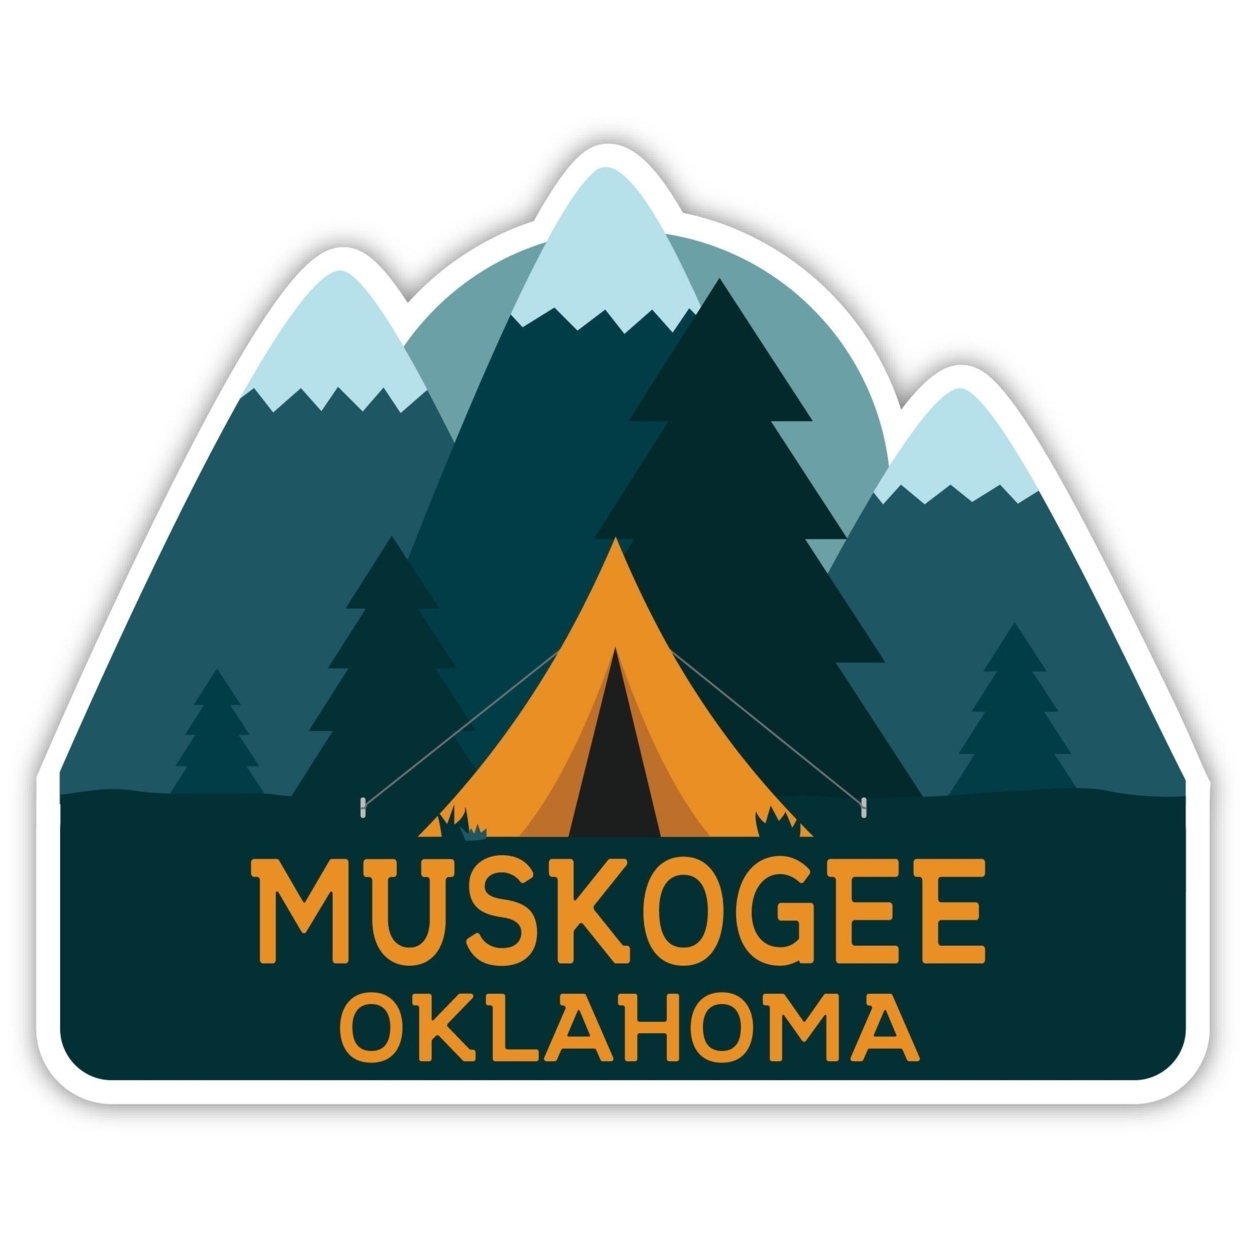 Muskogee Oklahoma Souvenir Decorative Stickers (Choose Theme And Size) - Single Unit, 2-Inch, Tent